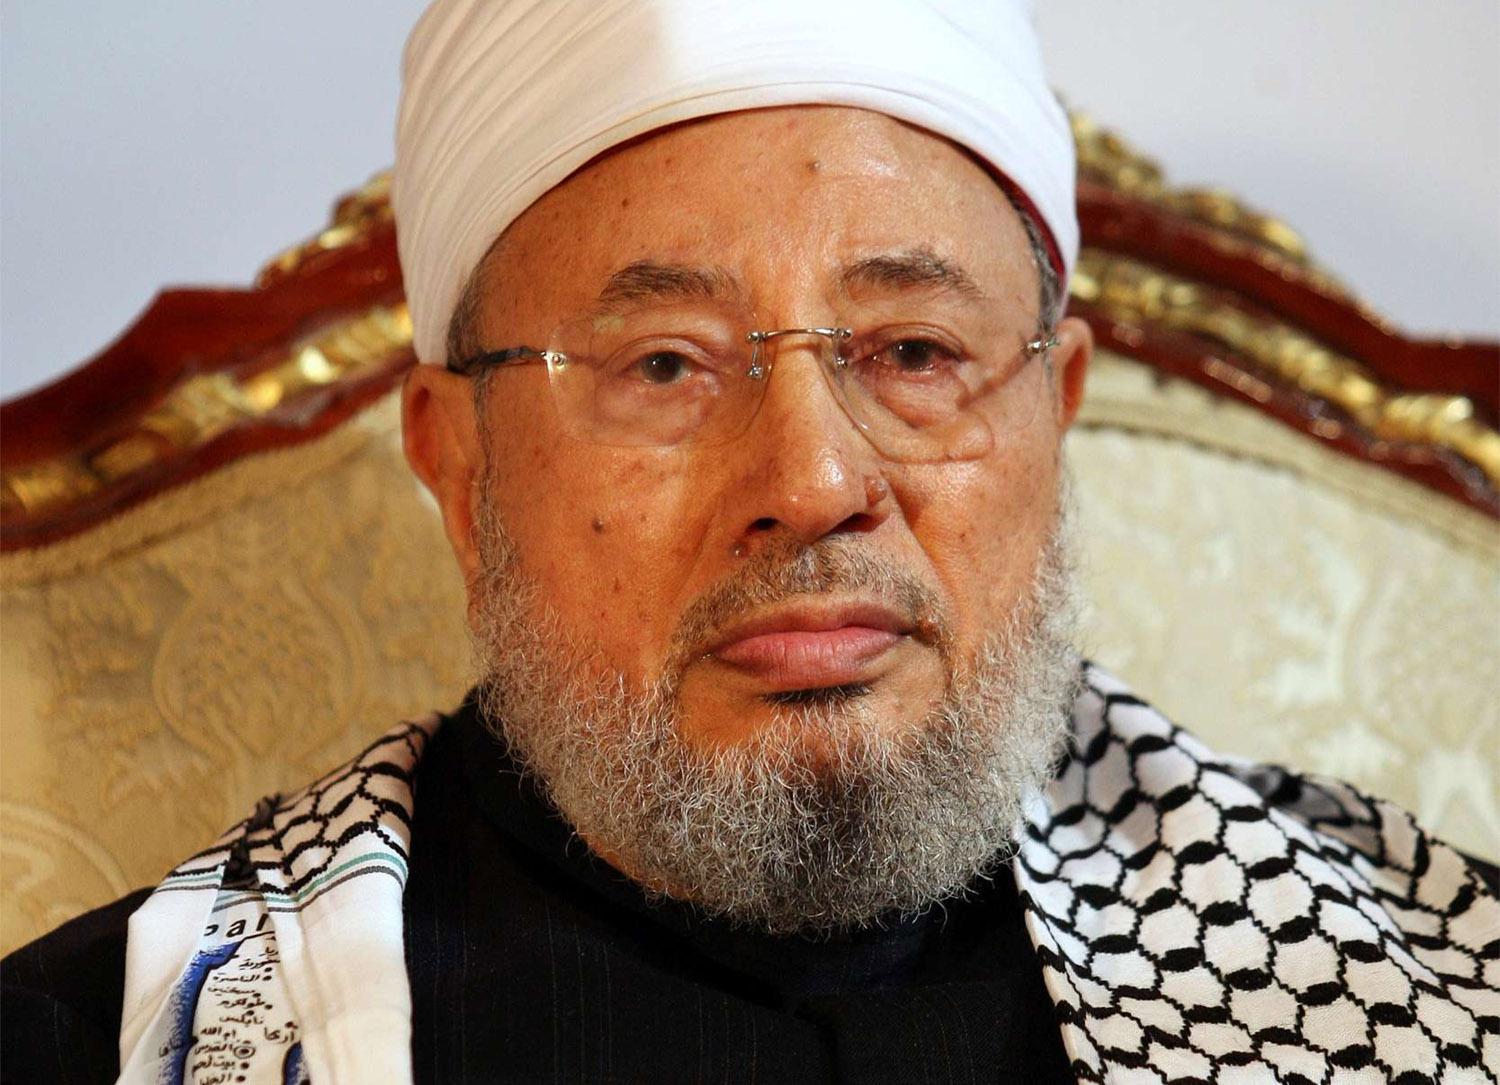 Al-Qaradawi lived in exile for many years